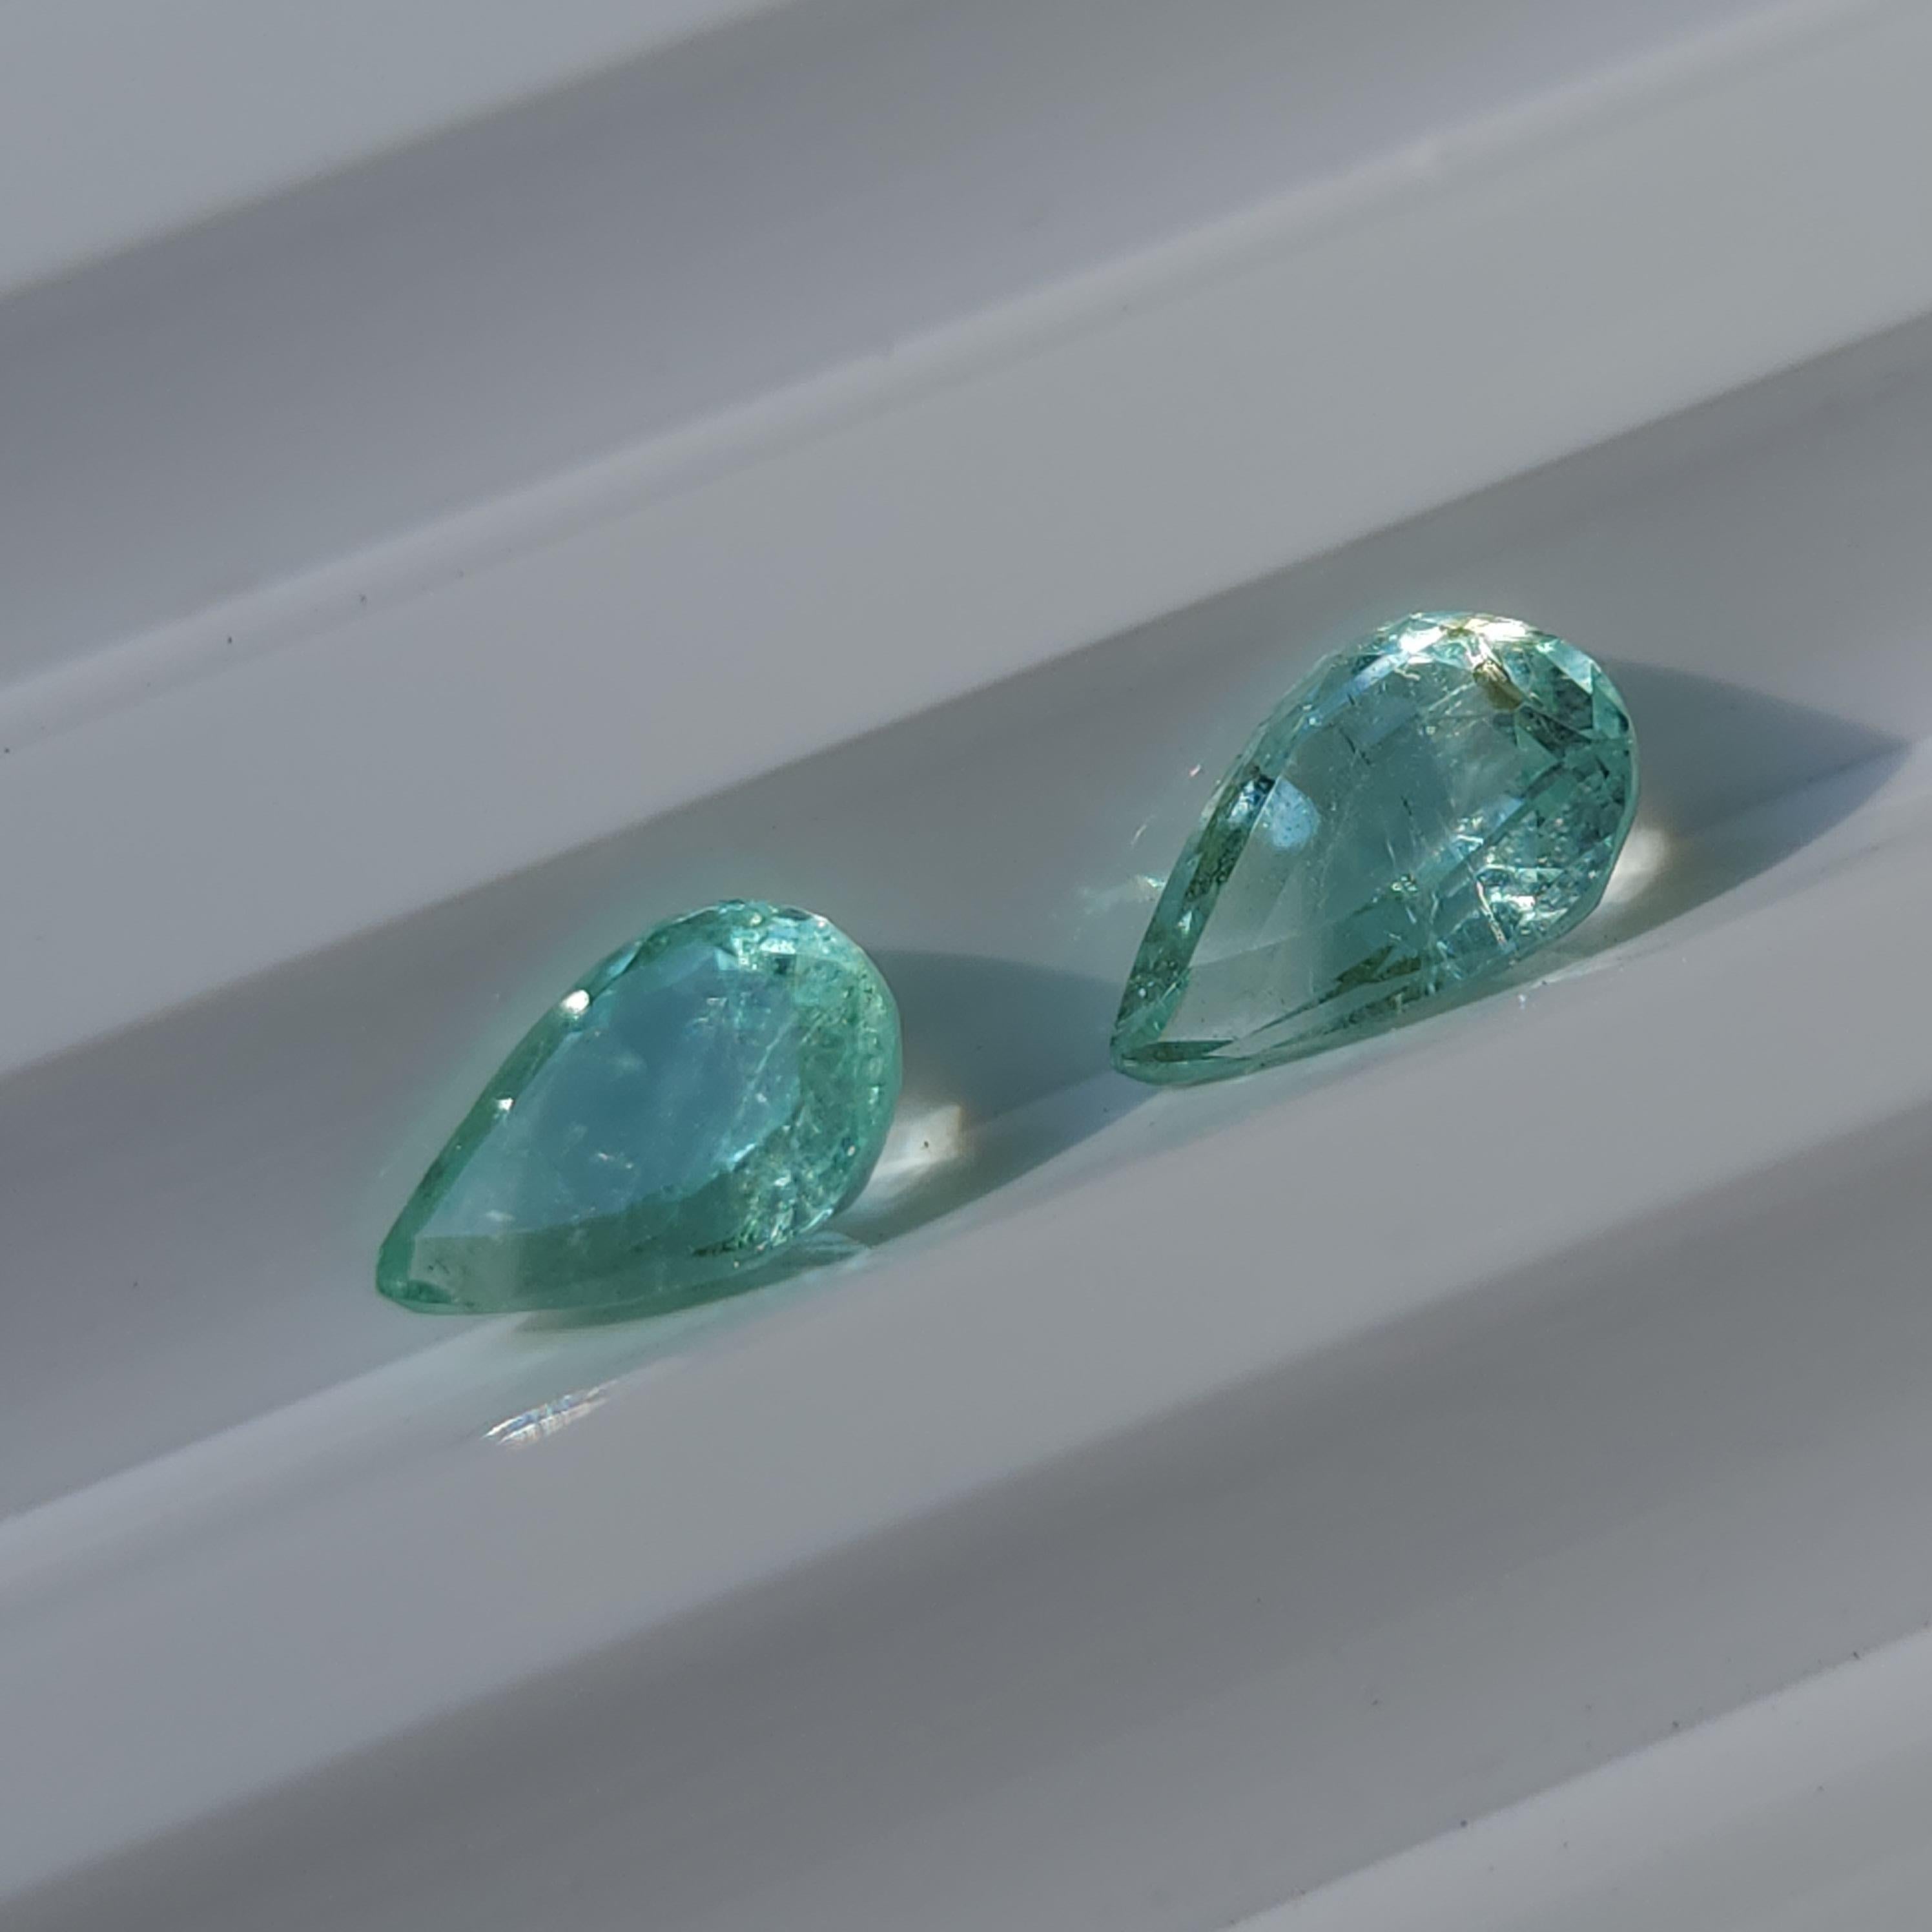 Mesmerizing 1.67ct Loose Pear Shape Emerald Gemstone

Product Description:

Behold the captivating allure of our 1.67ct loose Pear Shape Emerald gemstone. Melding the richness of nature with a shape that's both classic and contemporary, this